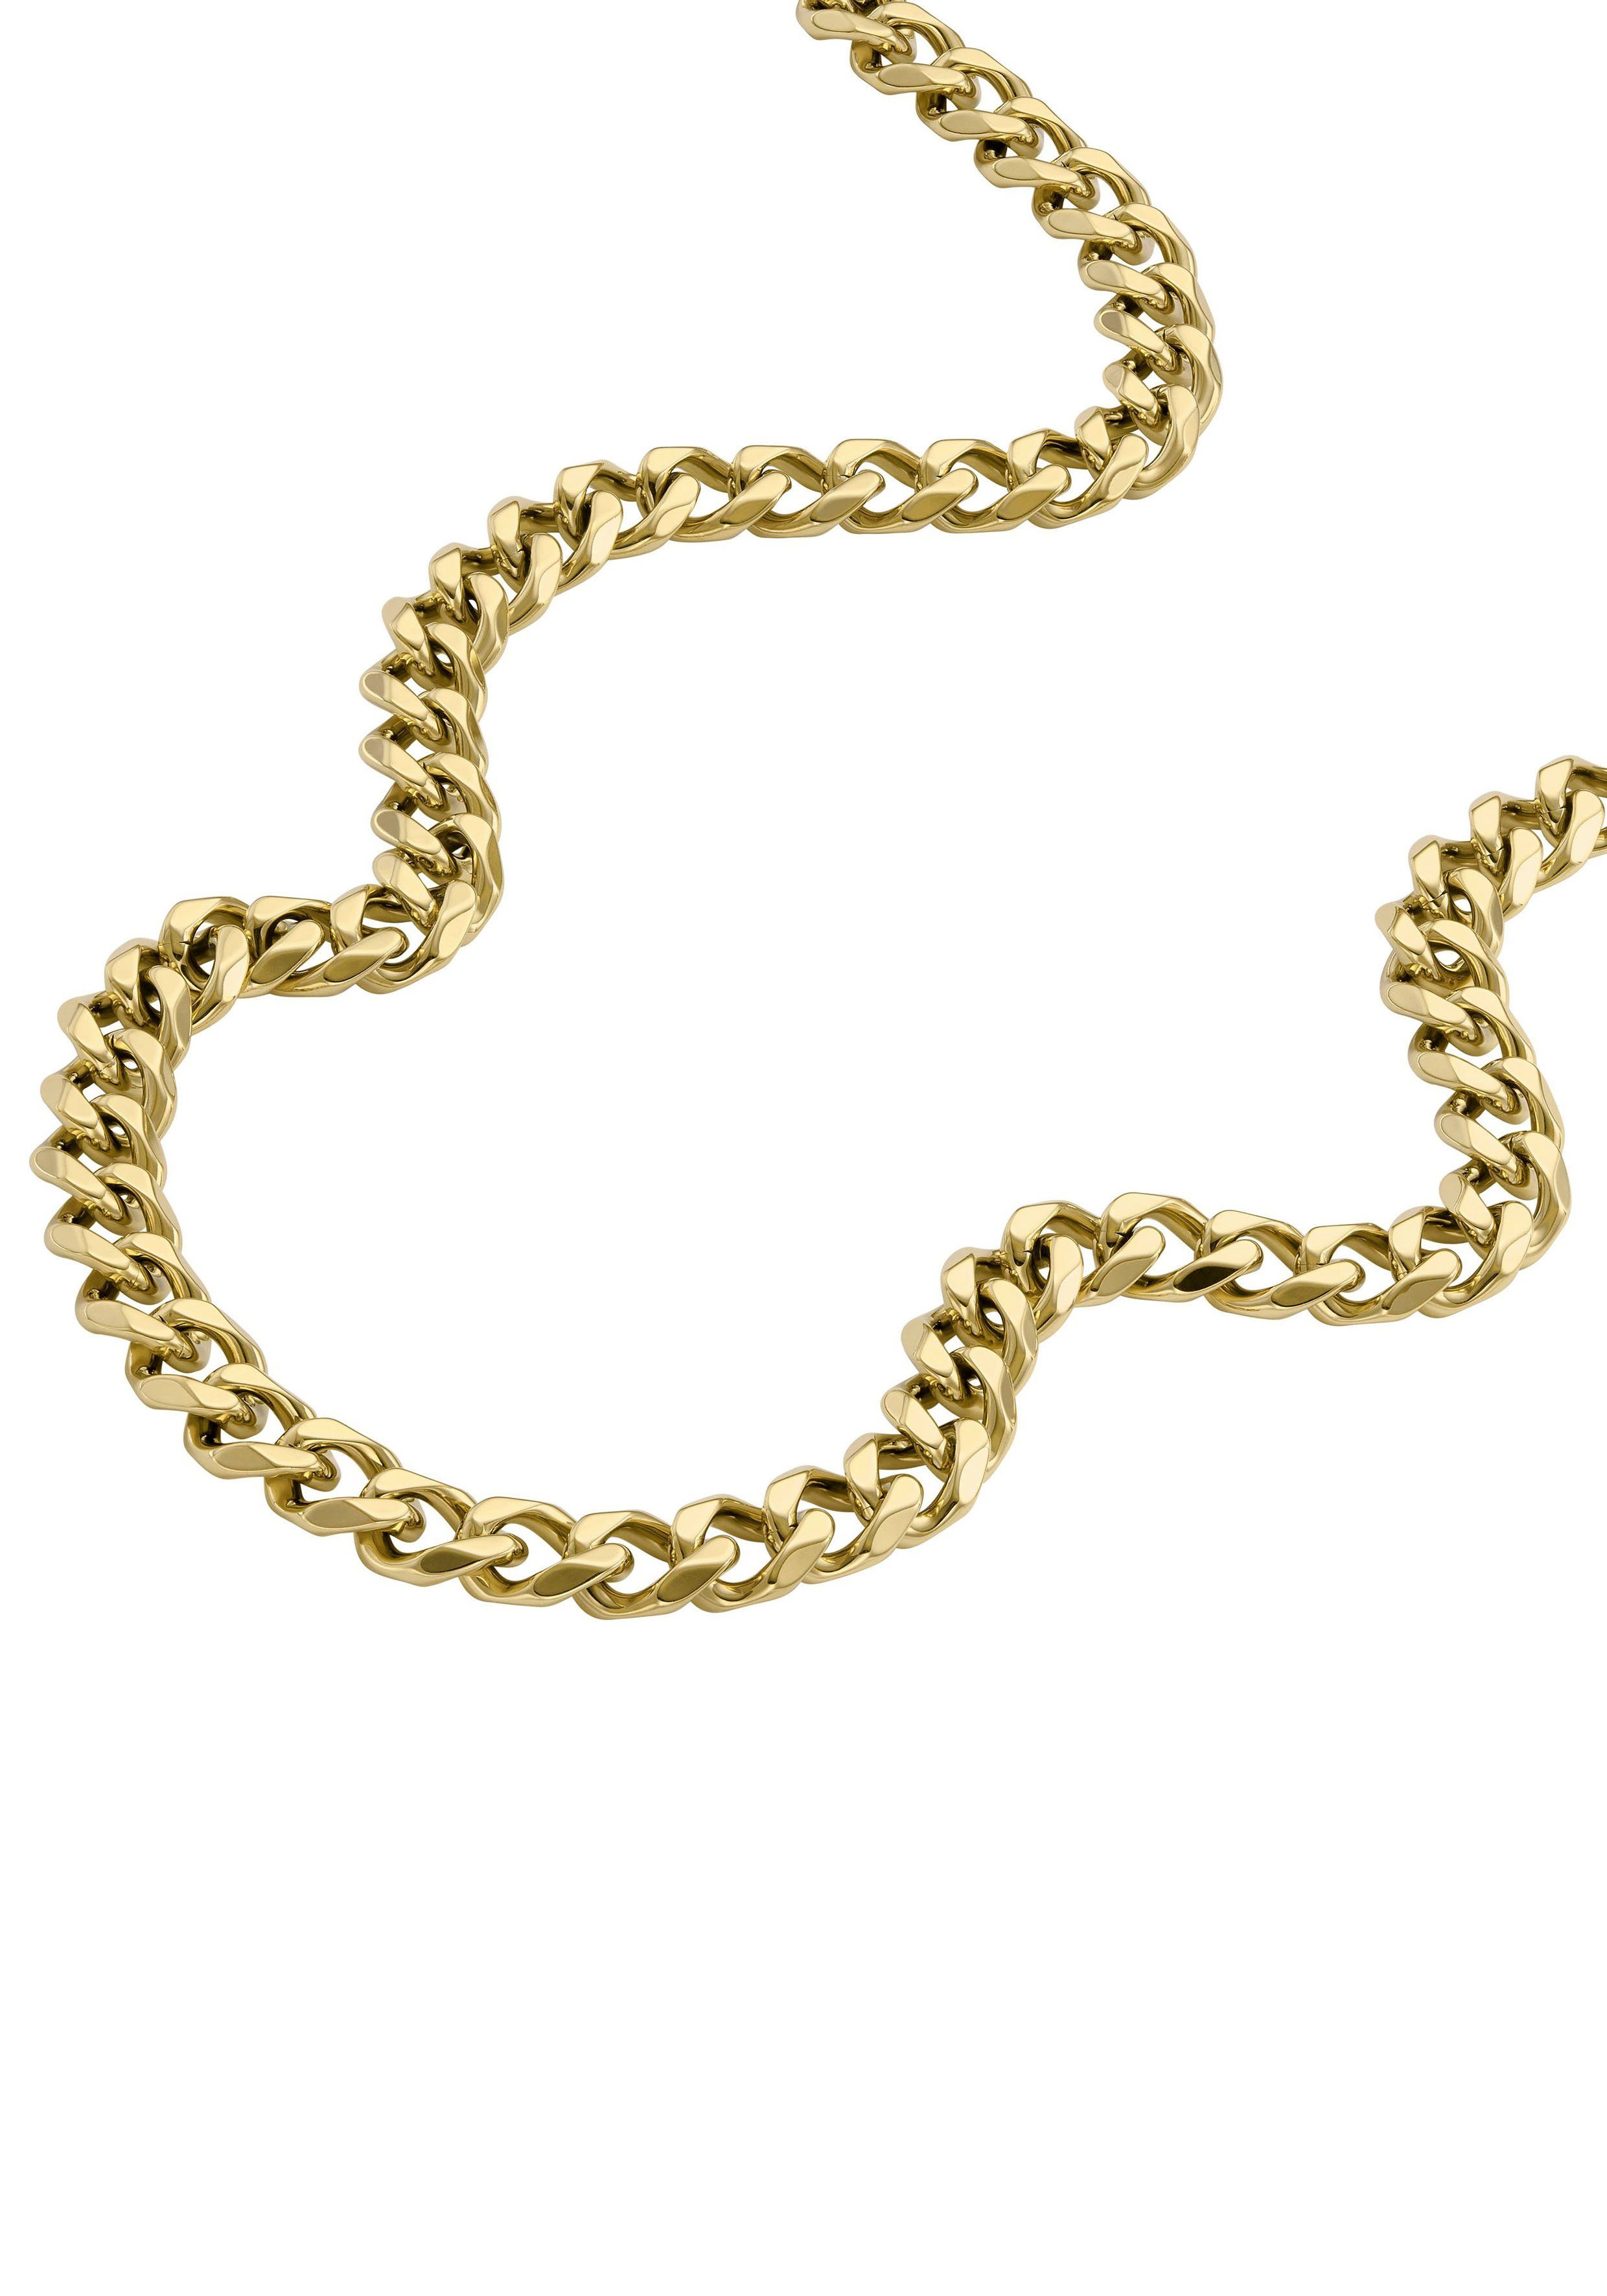 Edelstahlkette JF04614040, JF04612710, JF04614040 gelbgoldfarben Fossil JEWELRY CHAINS, BOLD